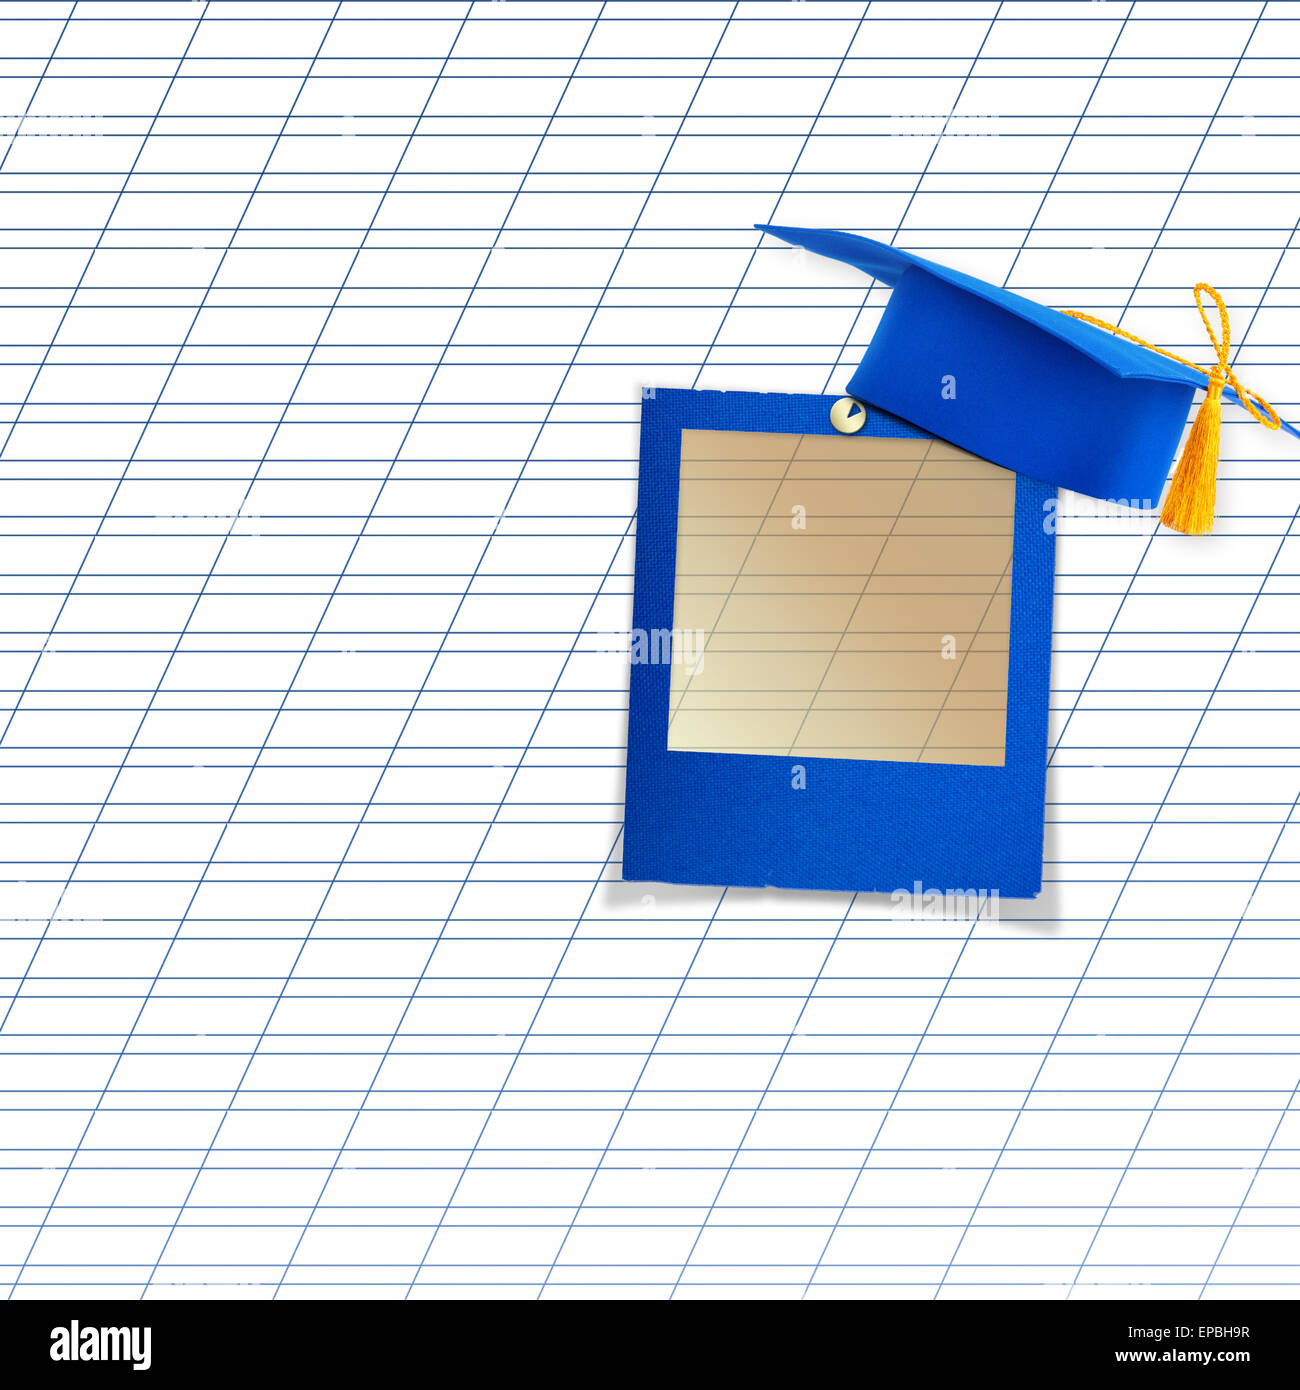 Mortar board or graduation cap with blue slide on the background notebook sheet Stock Photo